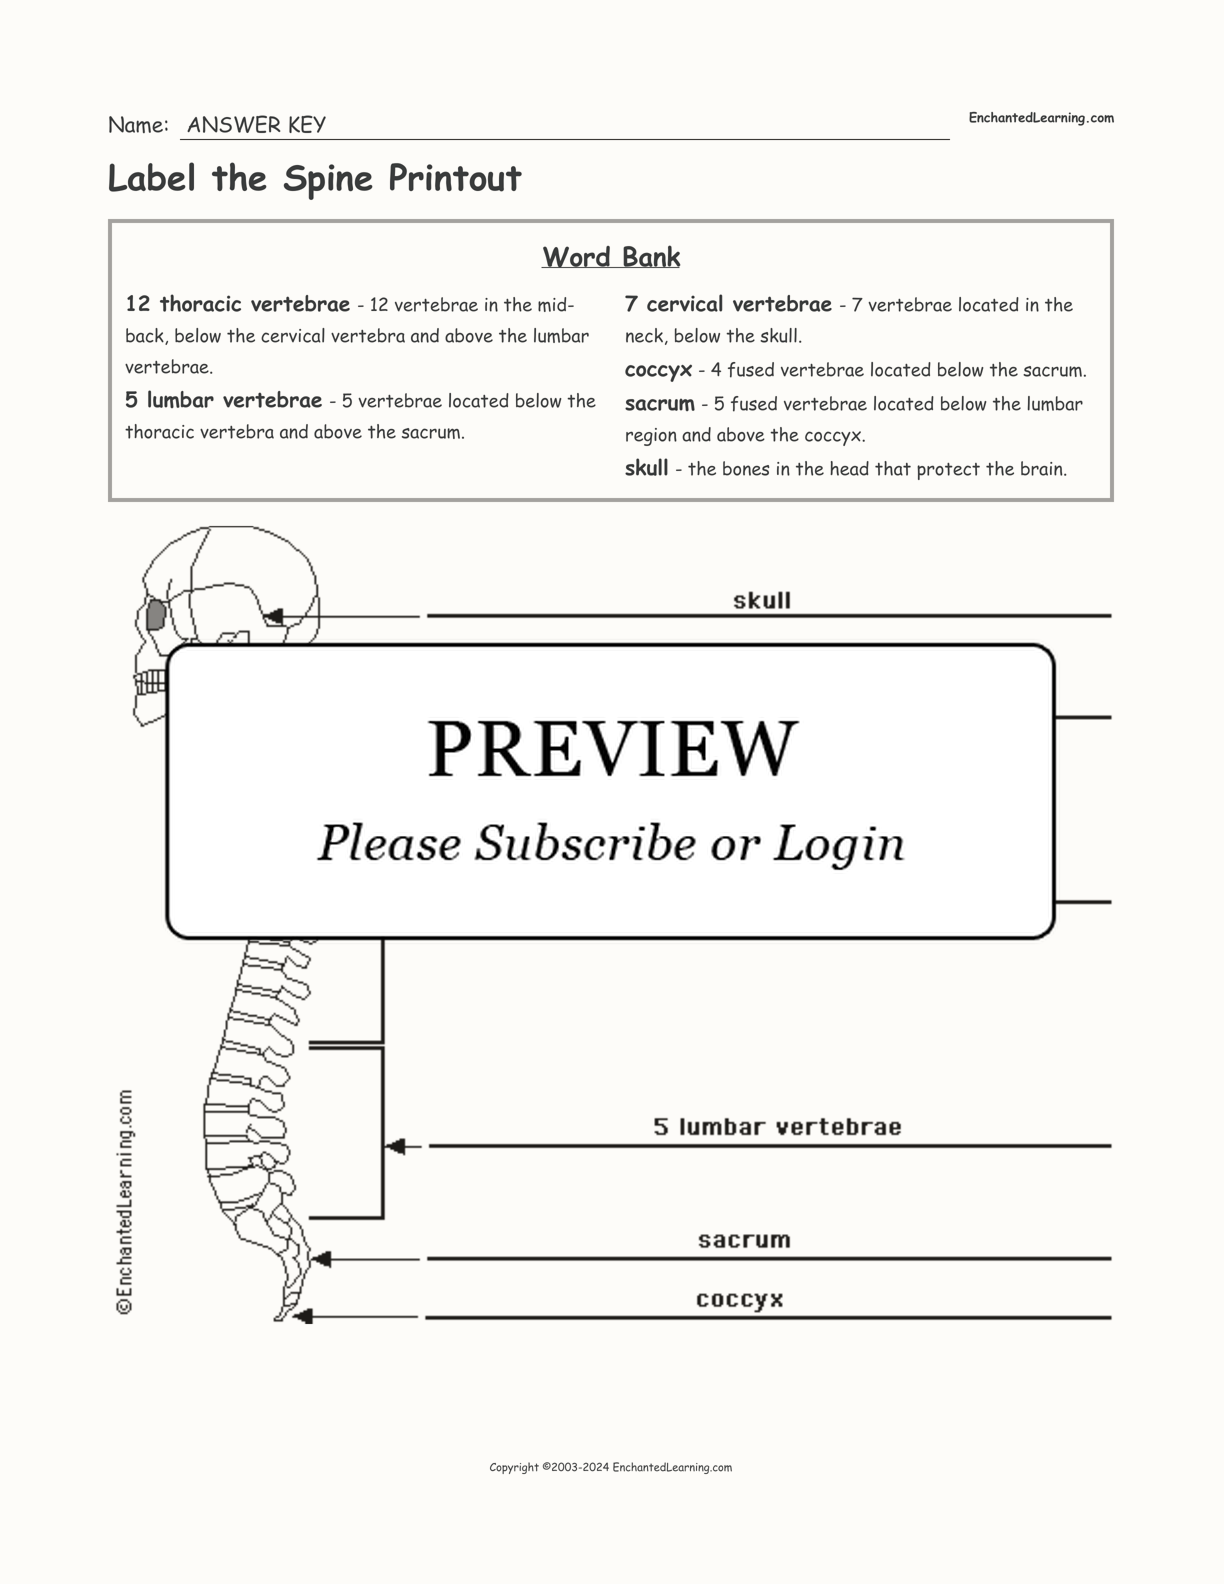 Label the Spine Printout interactive worksheet page 2